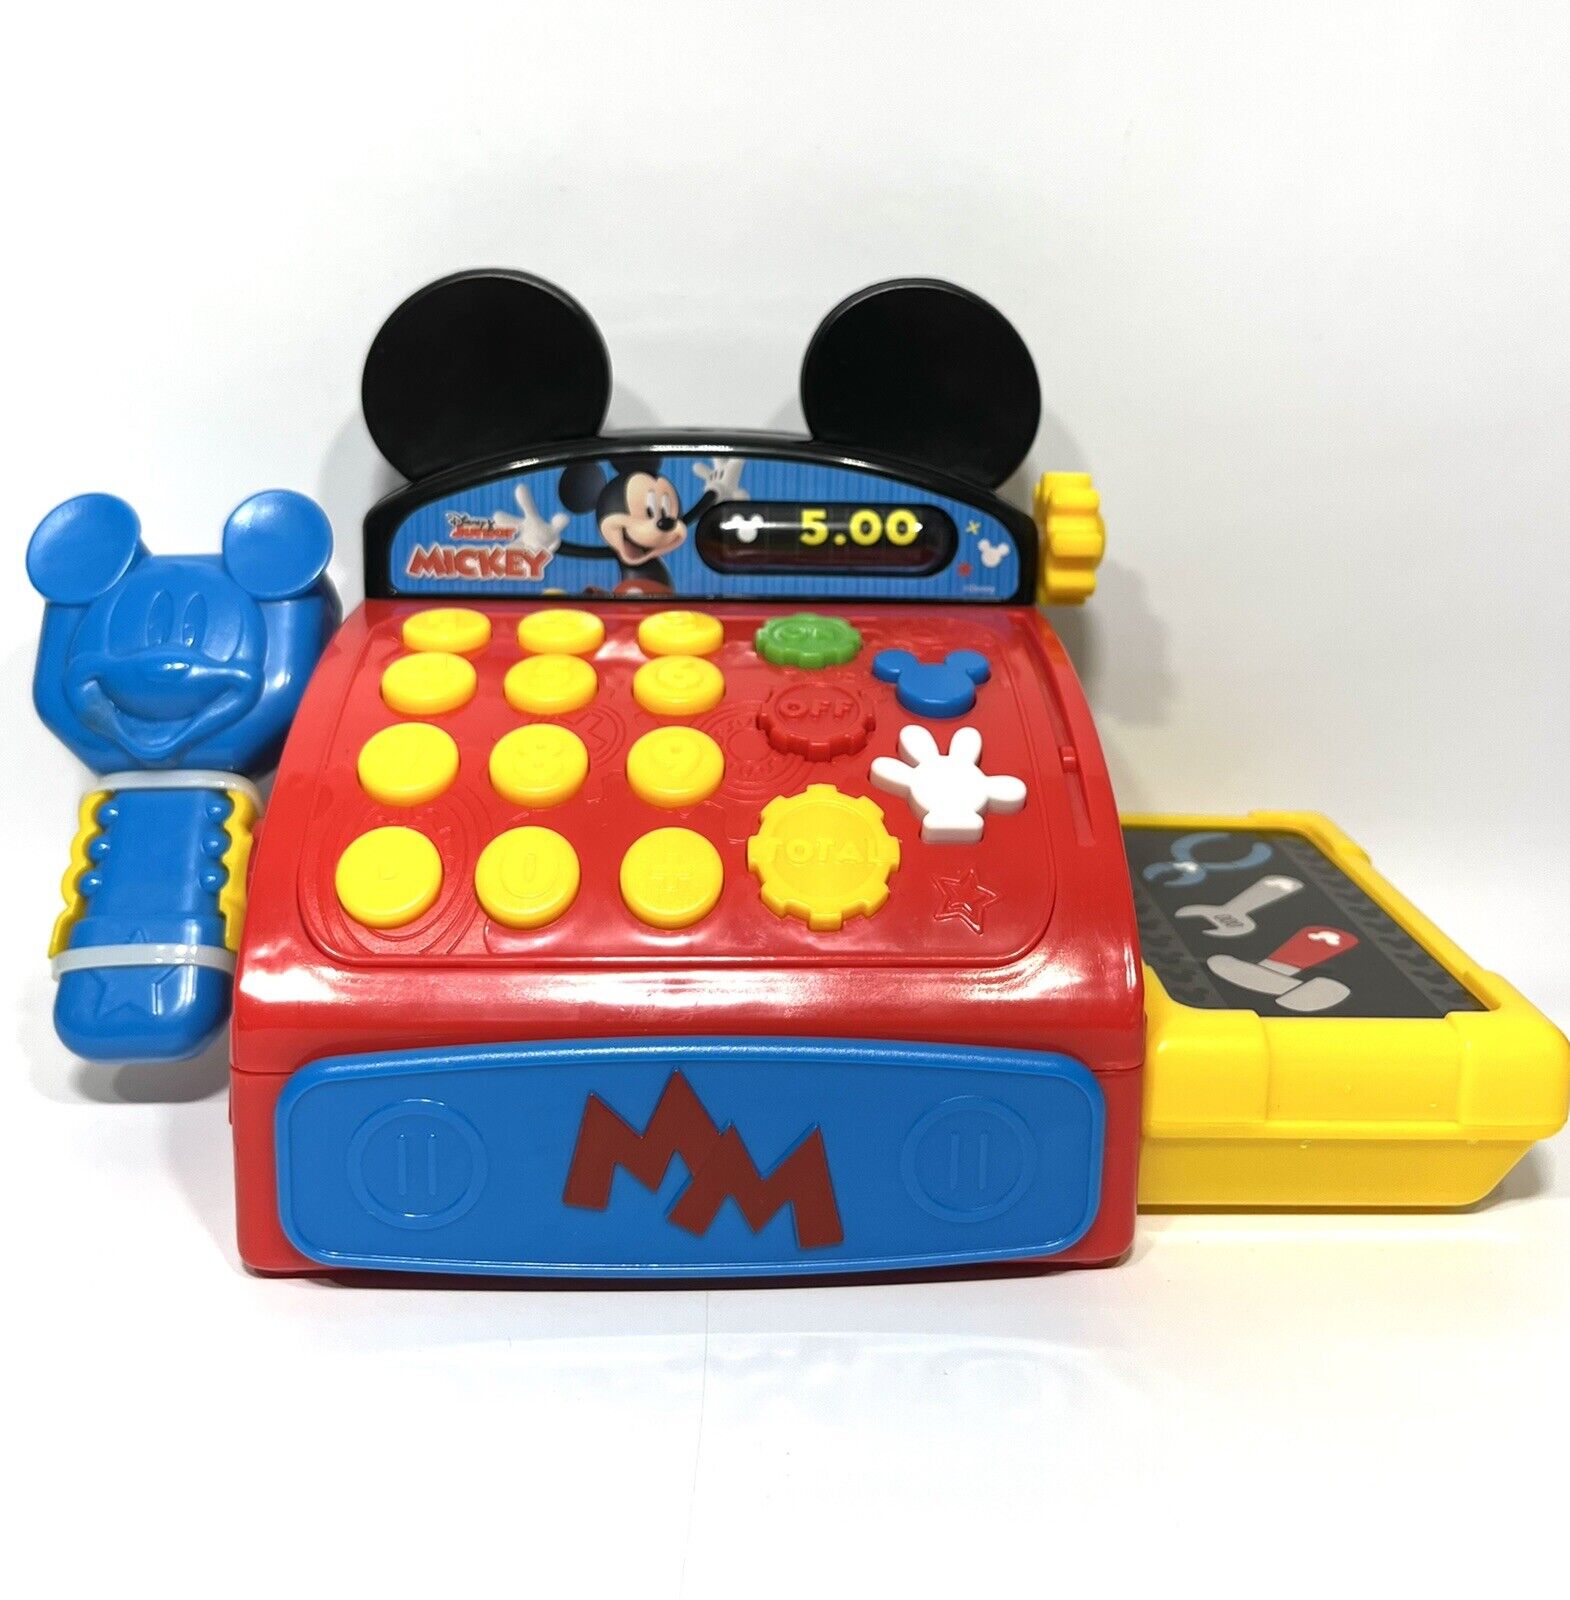 Disney Junior Mickey Mouse Cash Register - Very Clean- Tested Works Well